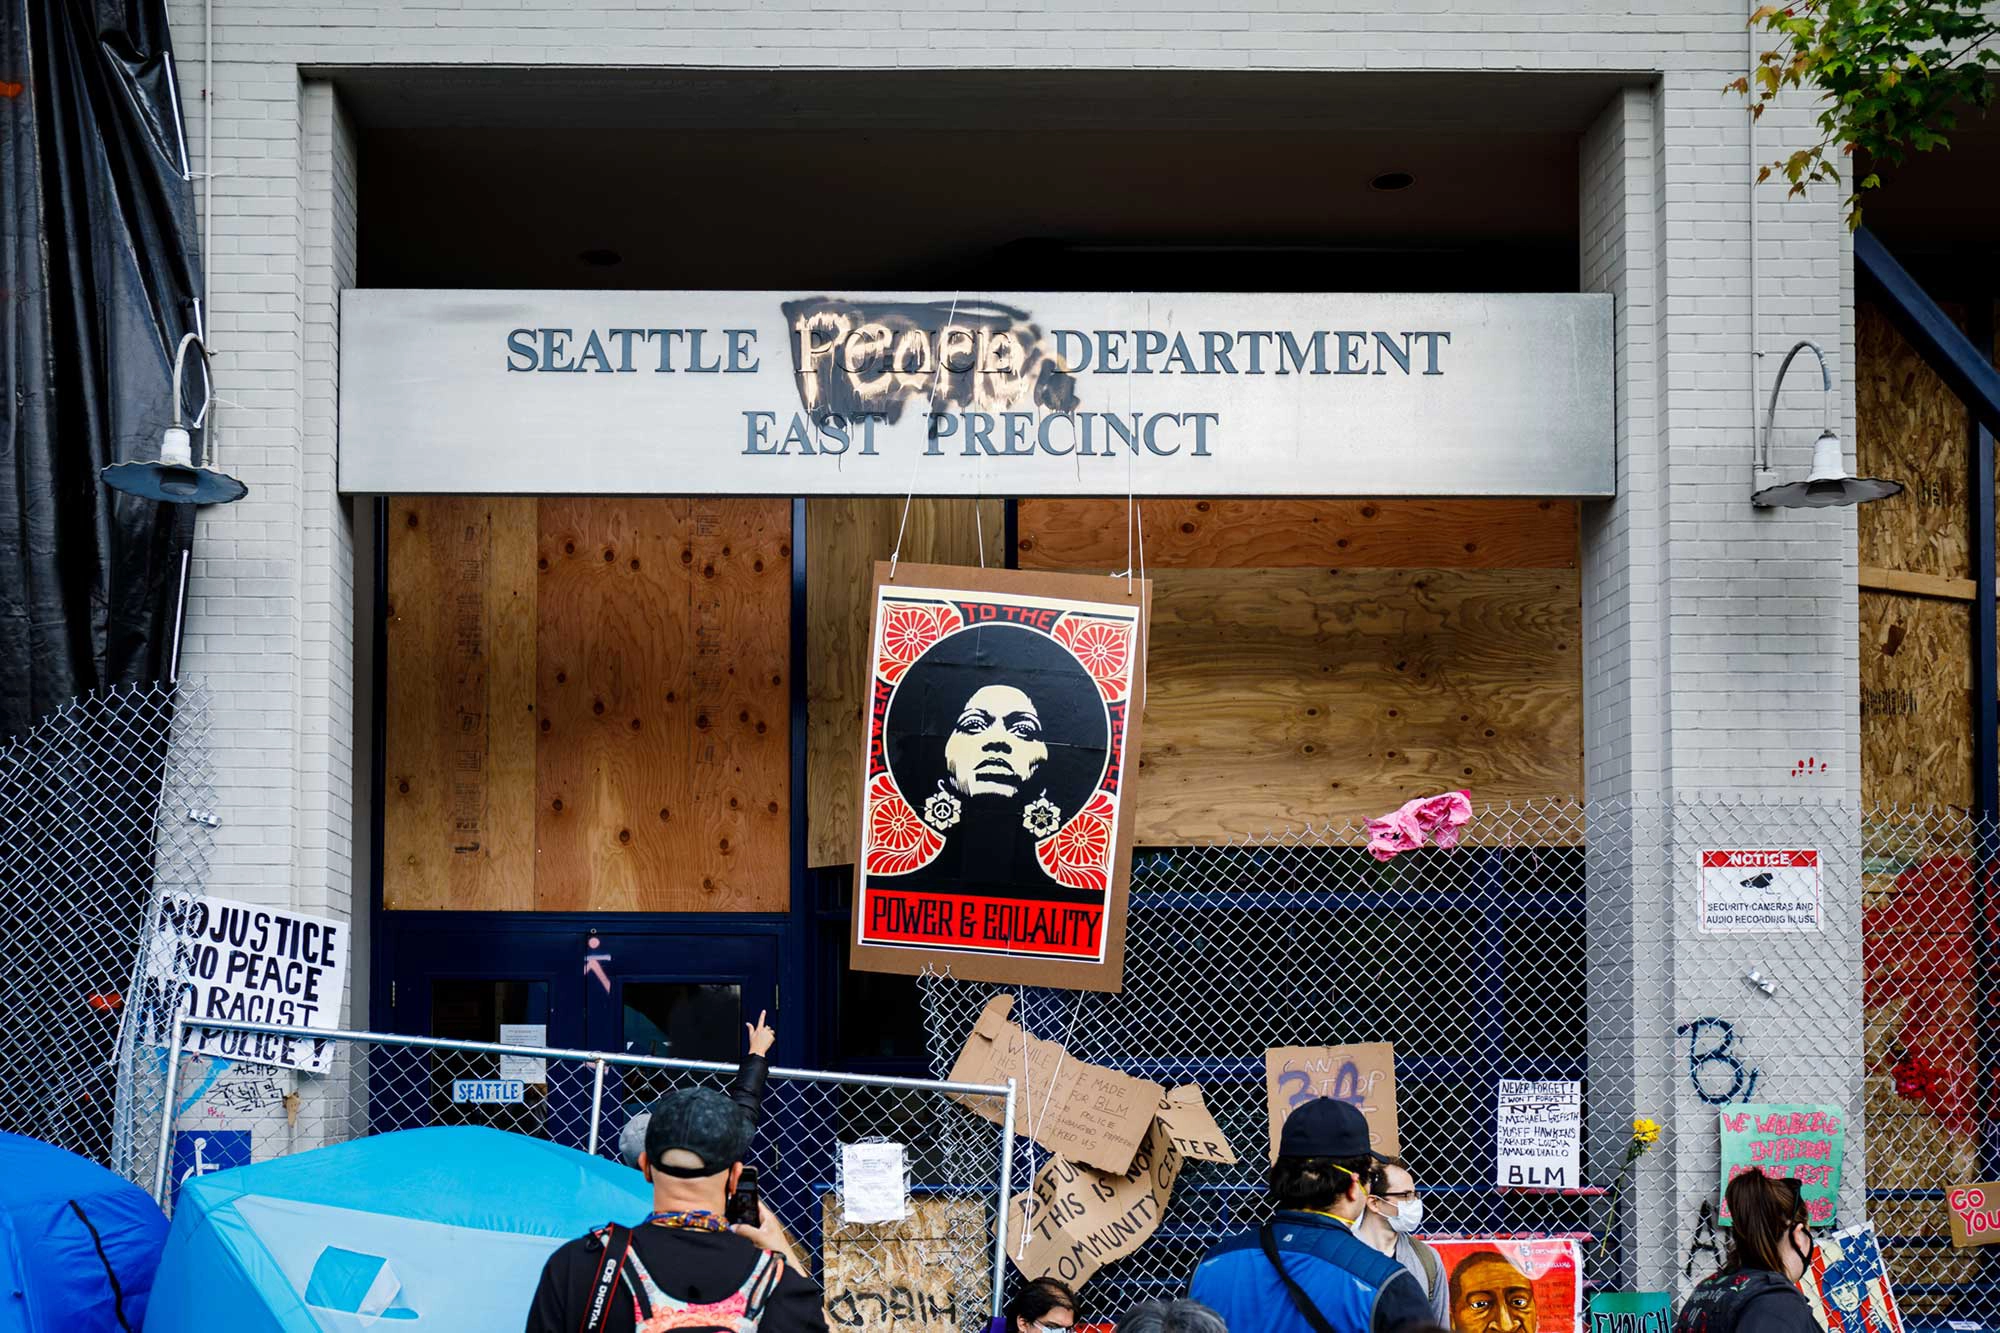 A portrait of Angela Davis hangs in front of an abandoned Seattle Police precinct within the CHAZ.